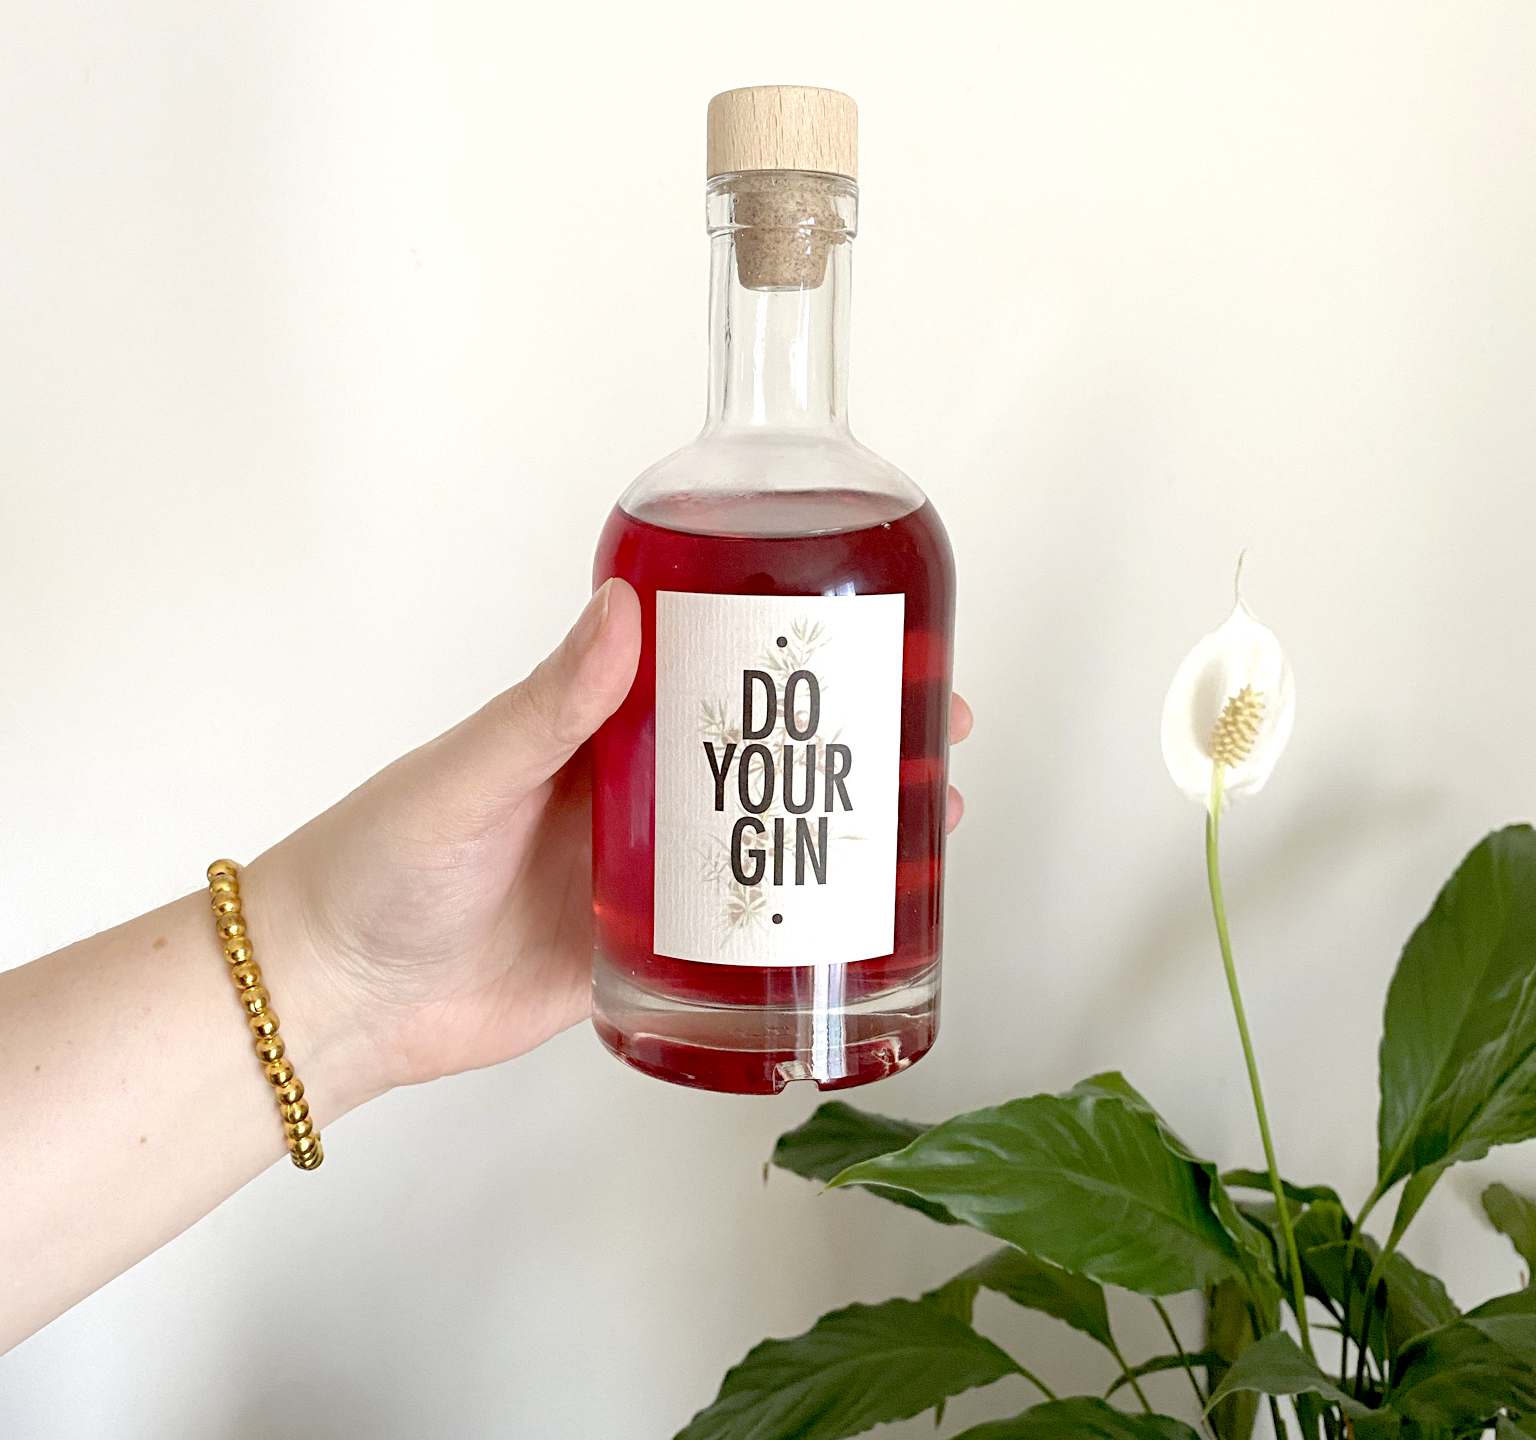 Review: “Do Your Gin” Gin Making Kit – English Rose from Manchester's Blog